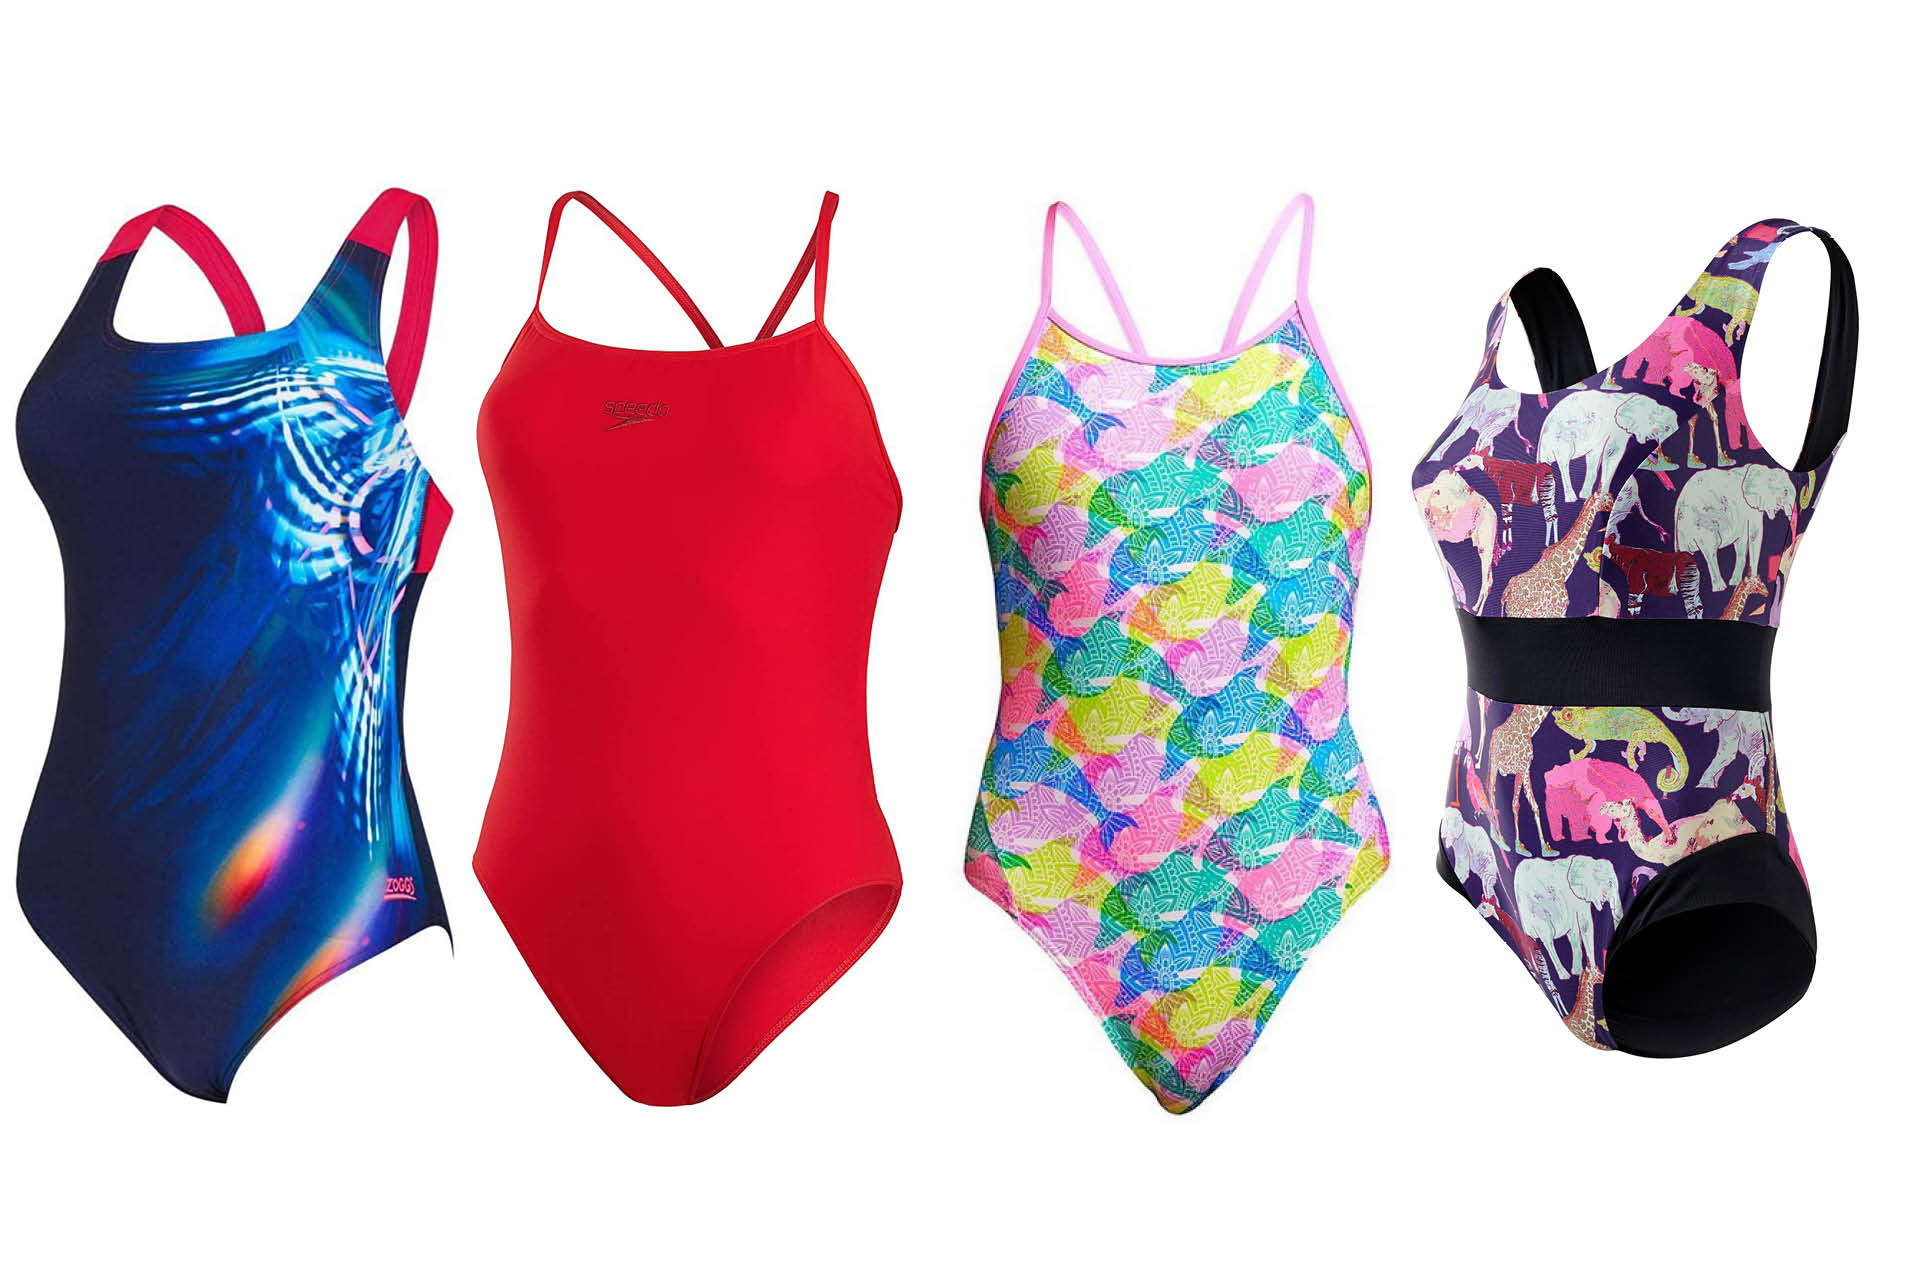 How to buy swimwear with confidence and grow a sustainable